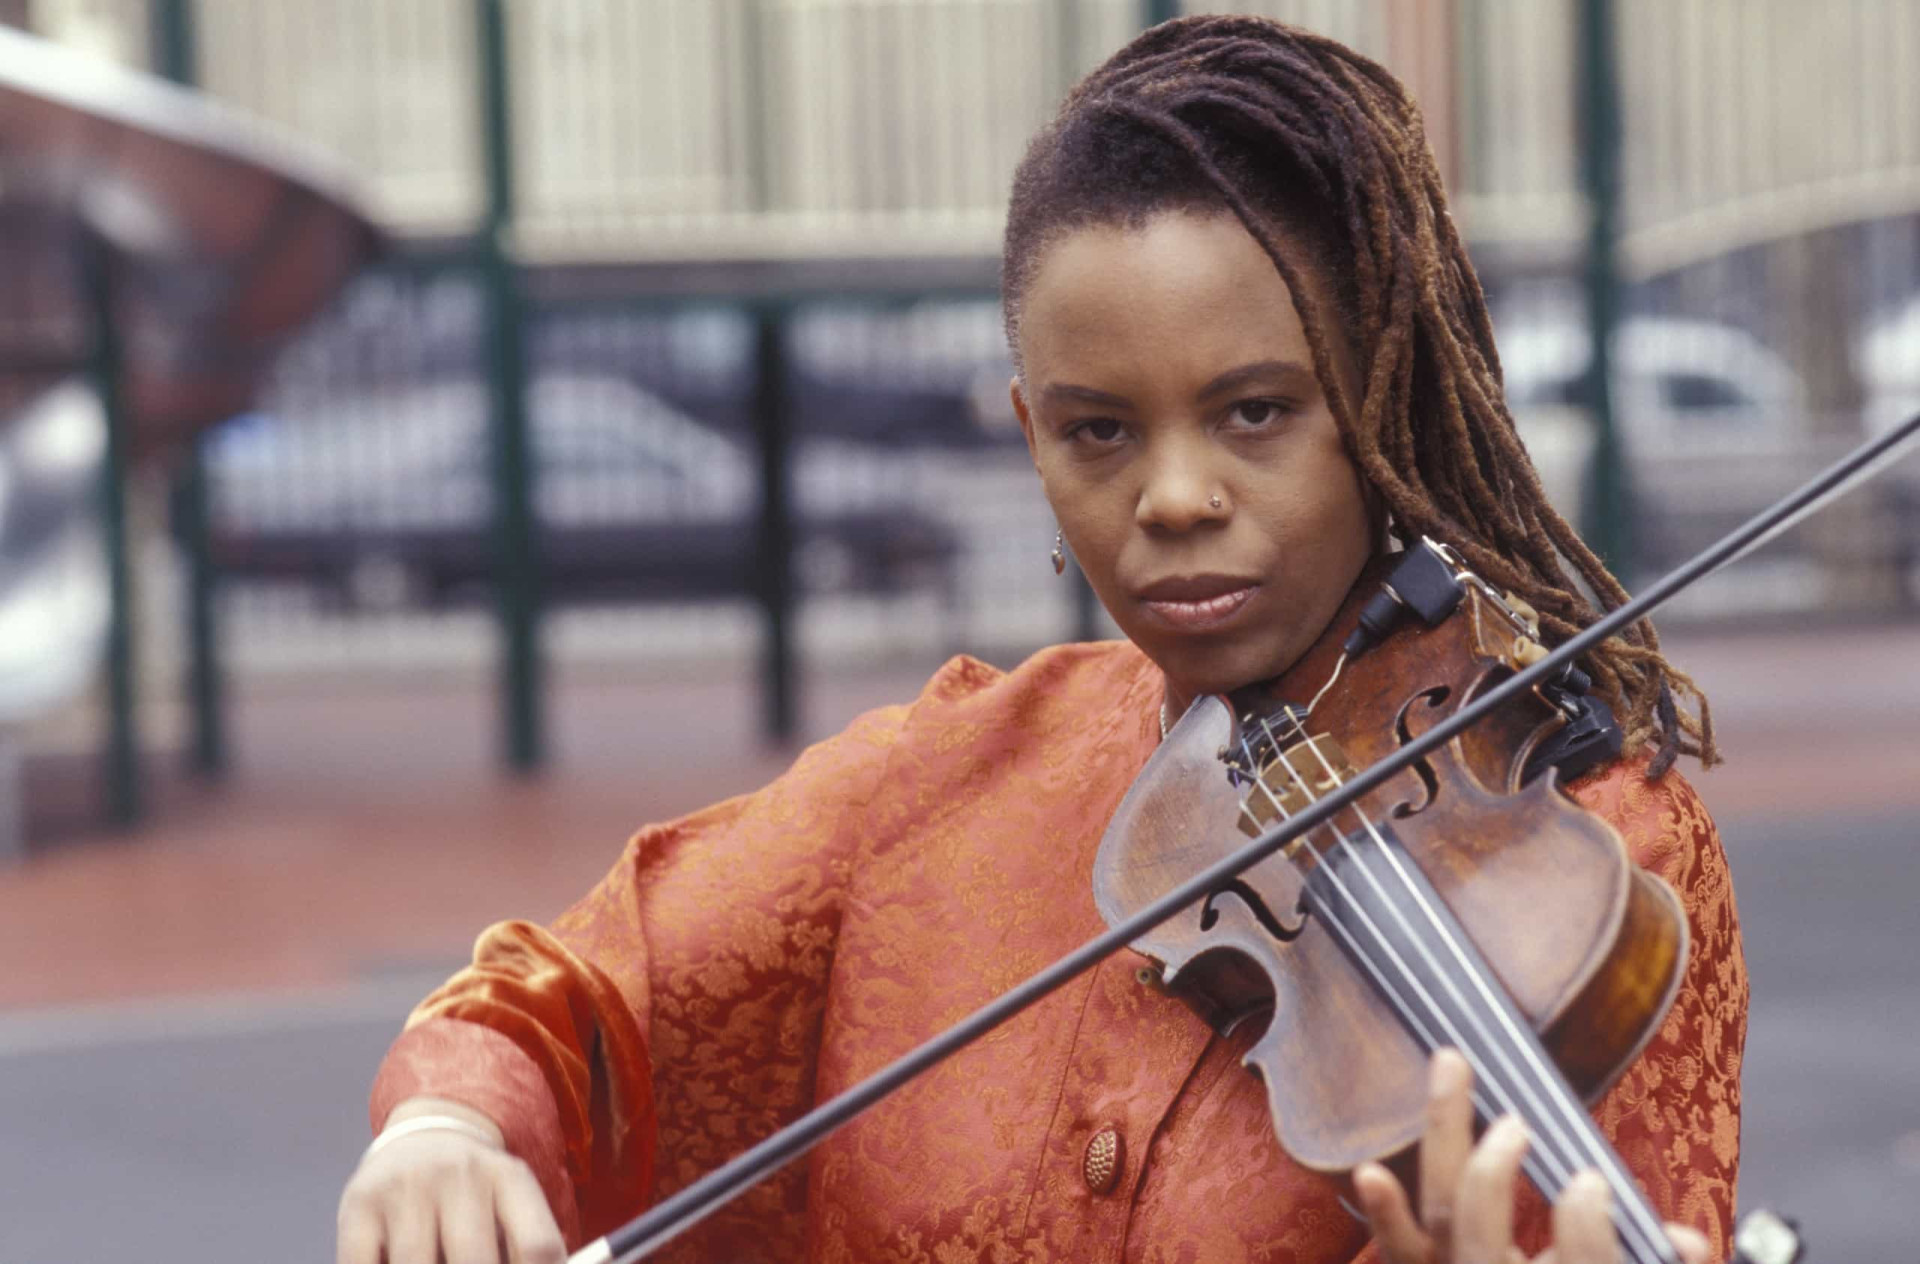 <p>Violinist Regina Carter, a native of Detroit, has led a colorful career playing alongside a wide range of artists, from Lauryn Hill to Dolly Parton. She is one of only a few renowned musicians keeping the art of jazz violin alive.</p><p><a href="https://www.msn.com/en-sg/community/channel/vid-7xx8mnucu55yw63we9va2gwr7uihbxwc68fxqp25x6tg4ftibpra?cvid=94631541bc0f4f89bfd59158d696ad7e">Follow us and access great exclusive content every day</a></p>